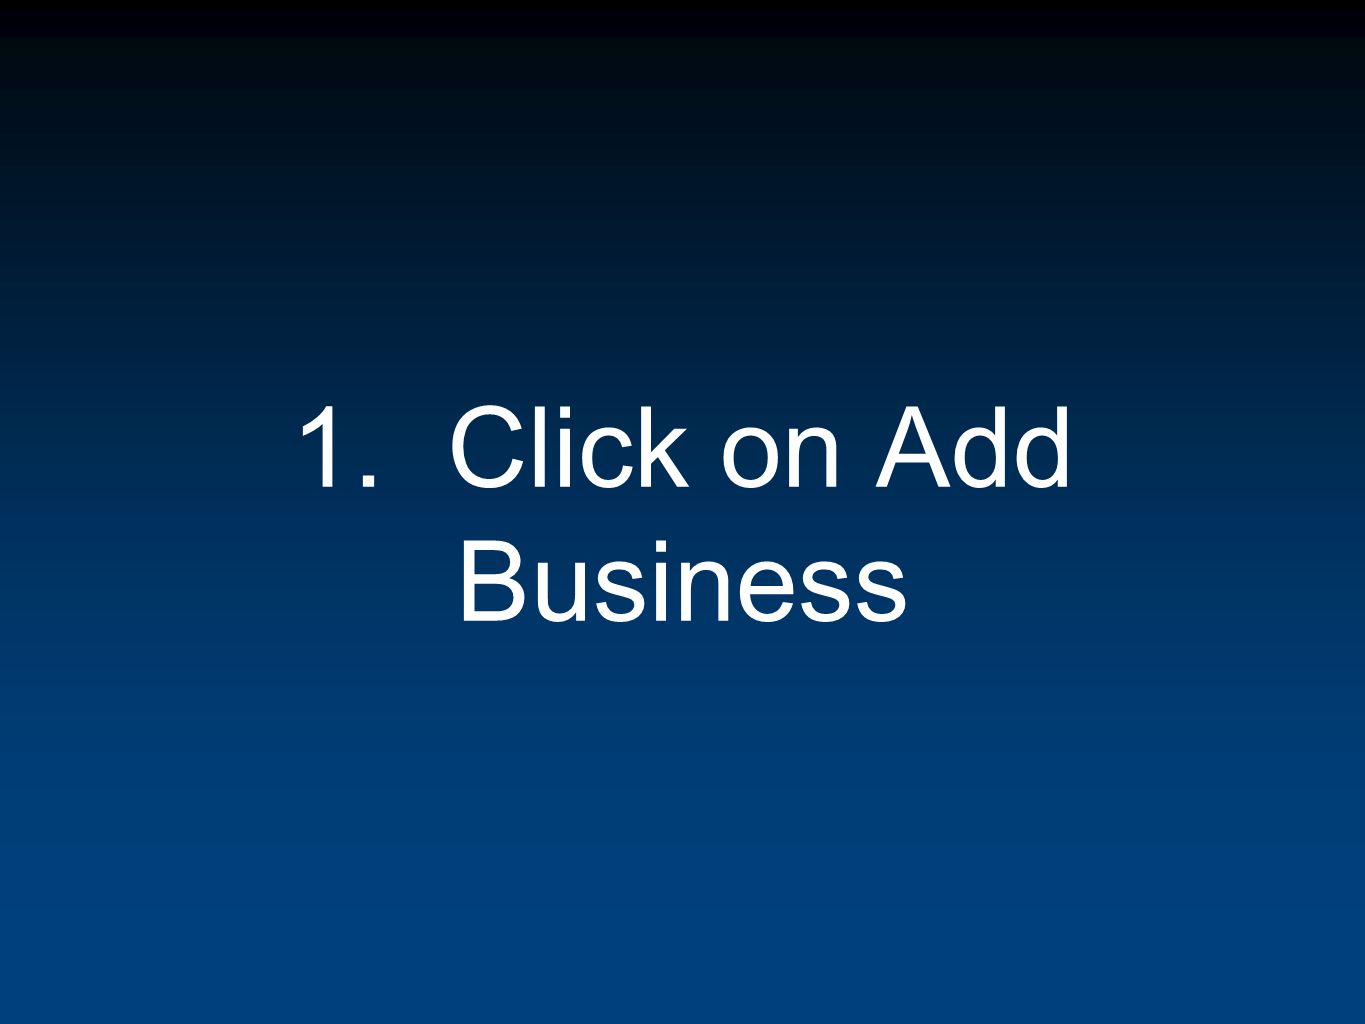 1. Click on Add Business